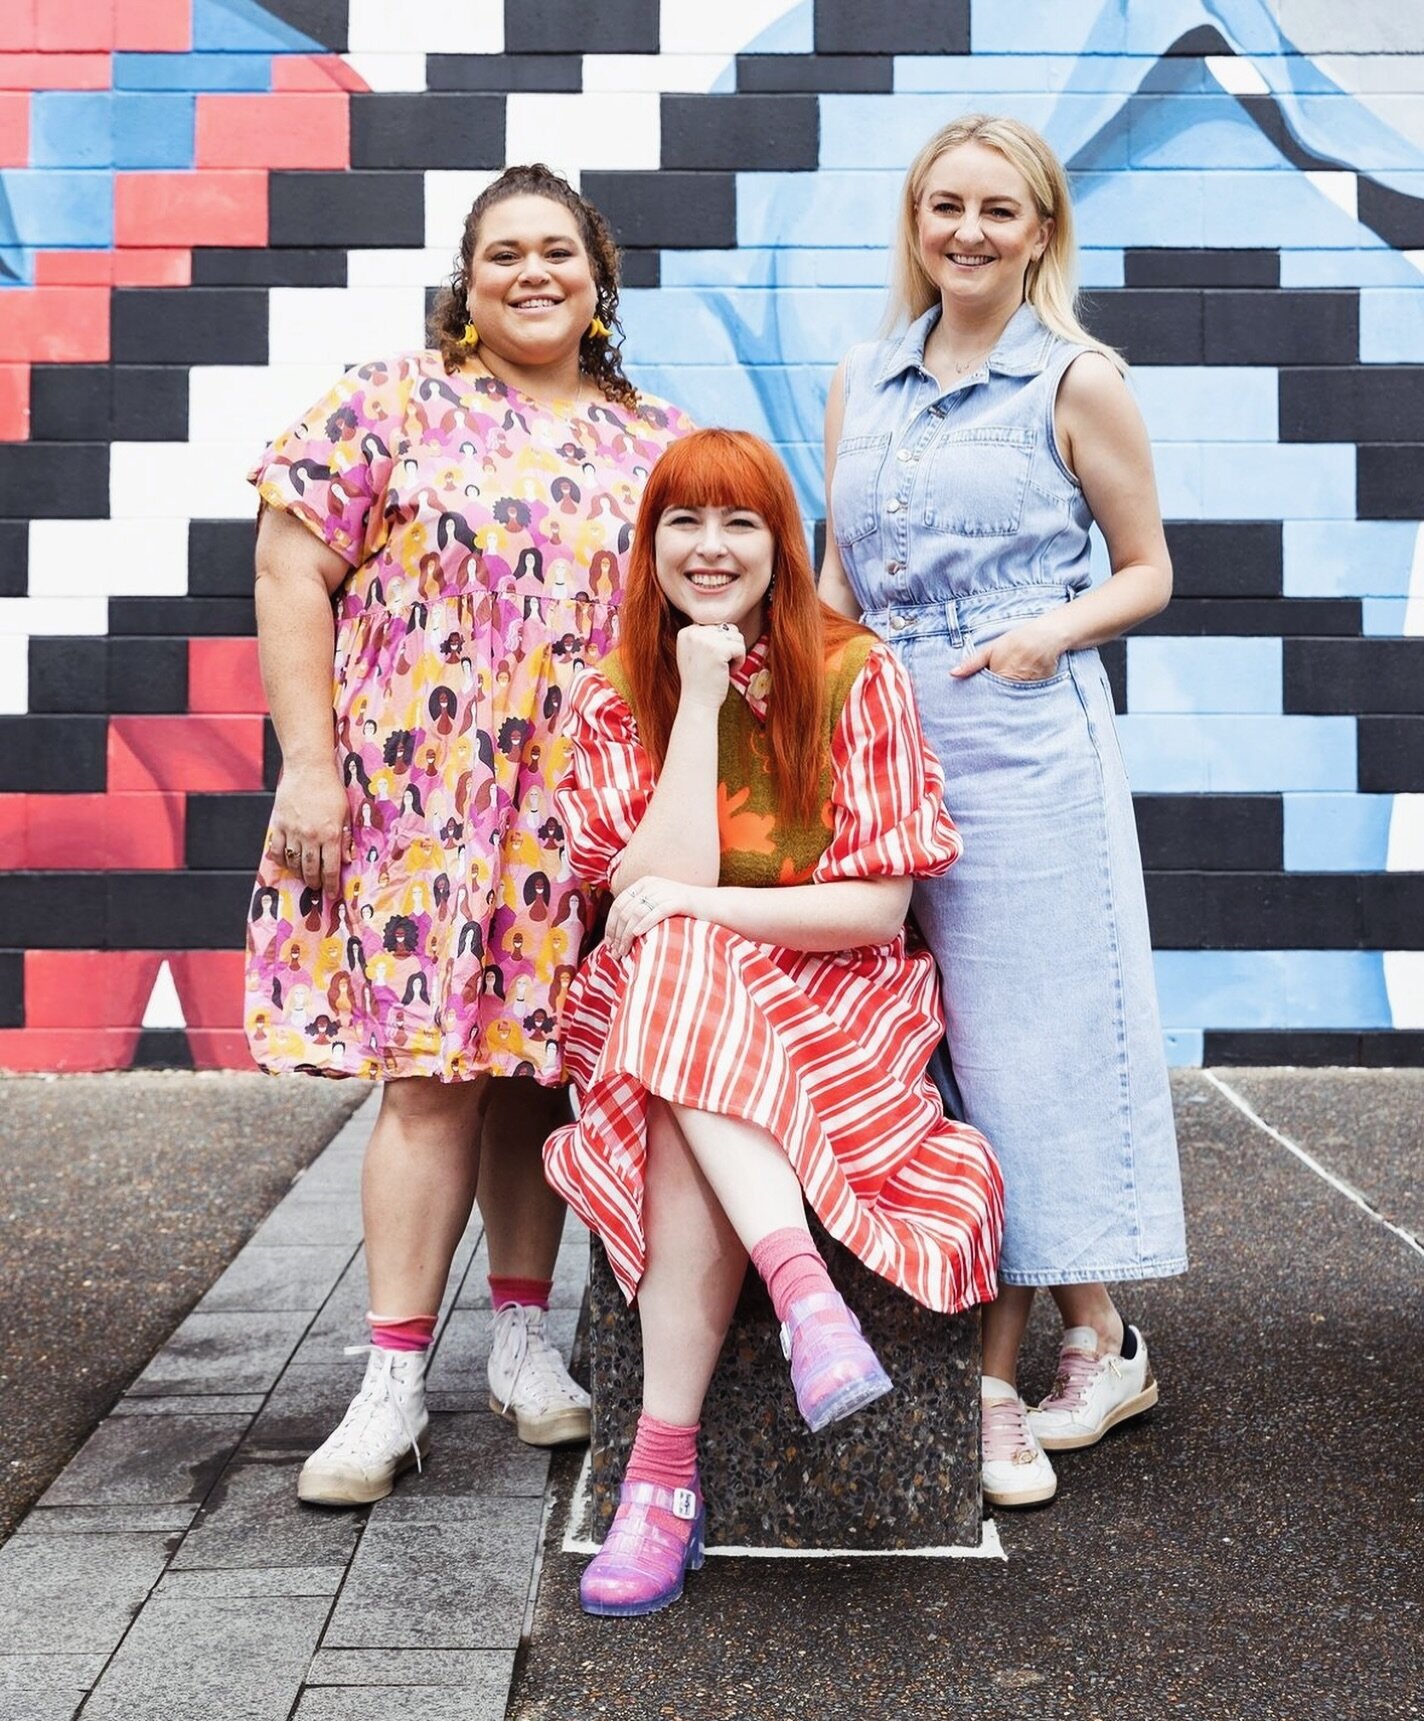 Dream team alert! So excited to be working alongside Waveney Yasso @wavenut as composer and Naomi Price @naomikprice to bring my new book Fancy Long Legs to the stage this September @laboitetheatre @brisbanefestival @thelittleredco 🎀 Tickets for thi